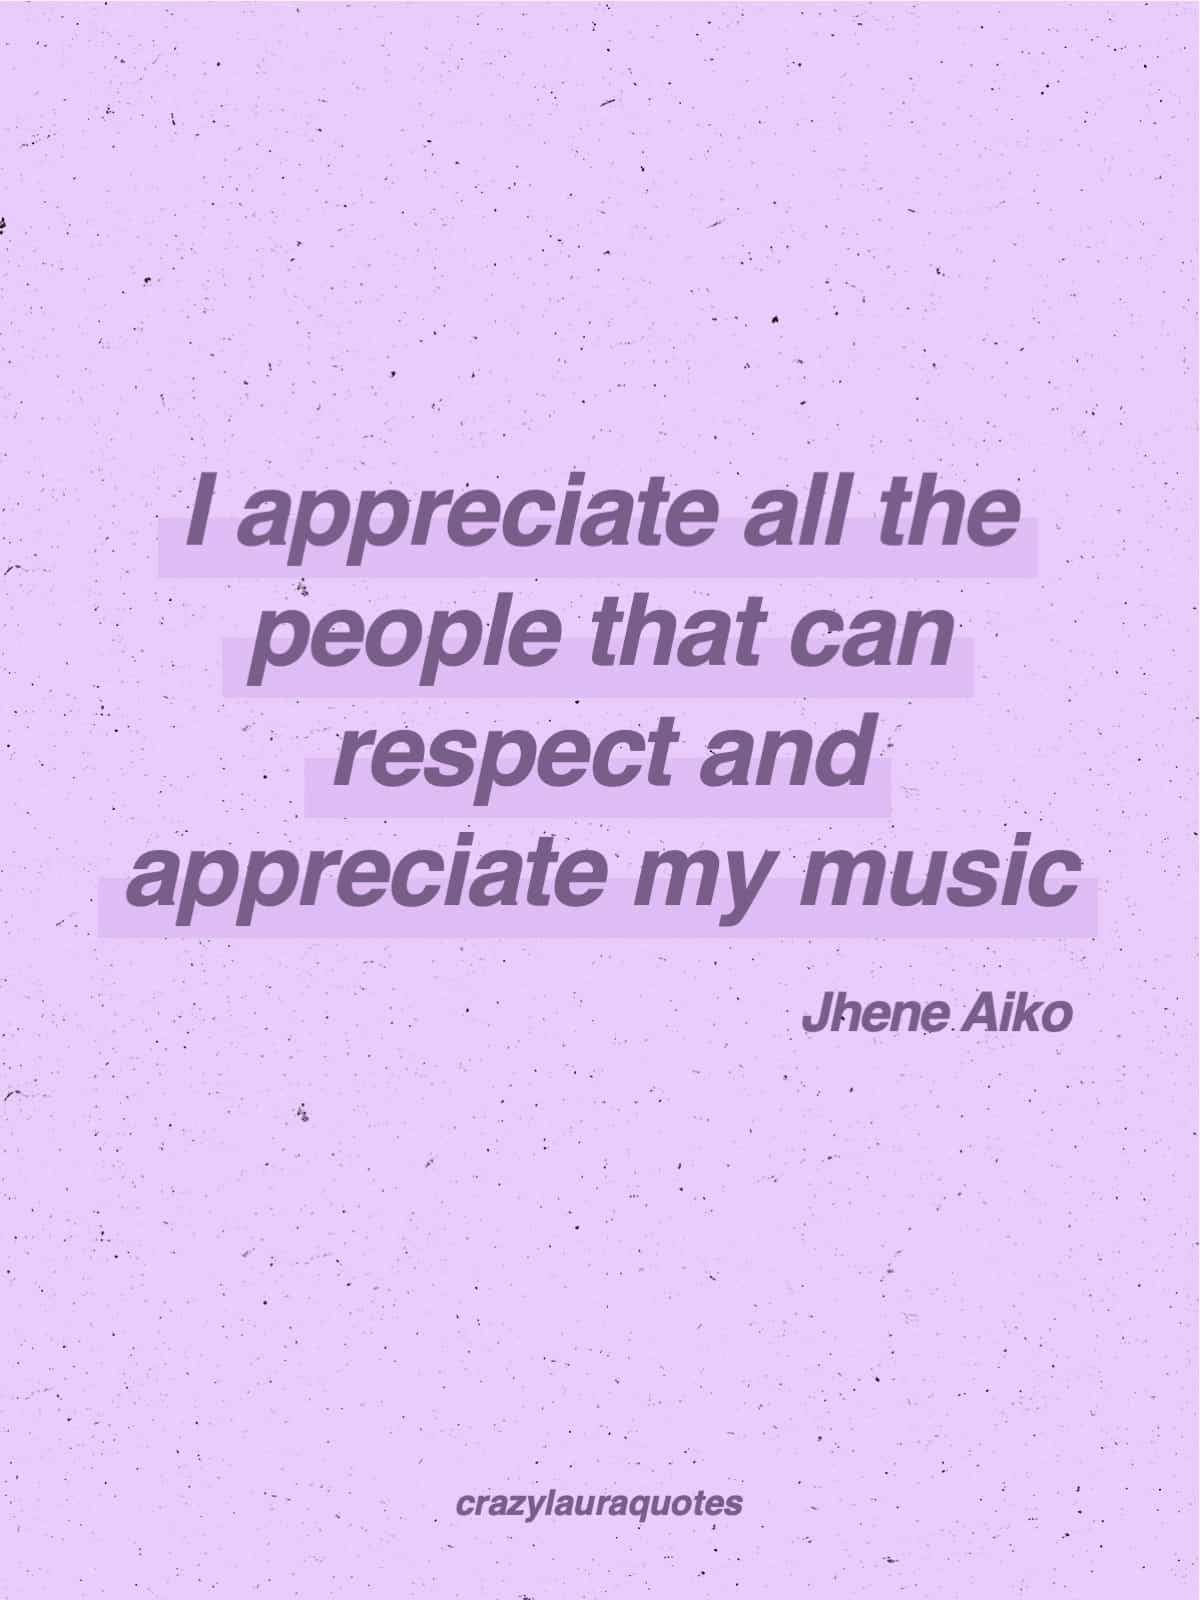 jhene aiko quote about her music